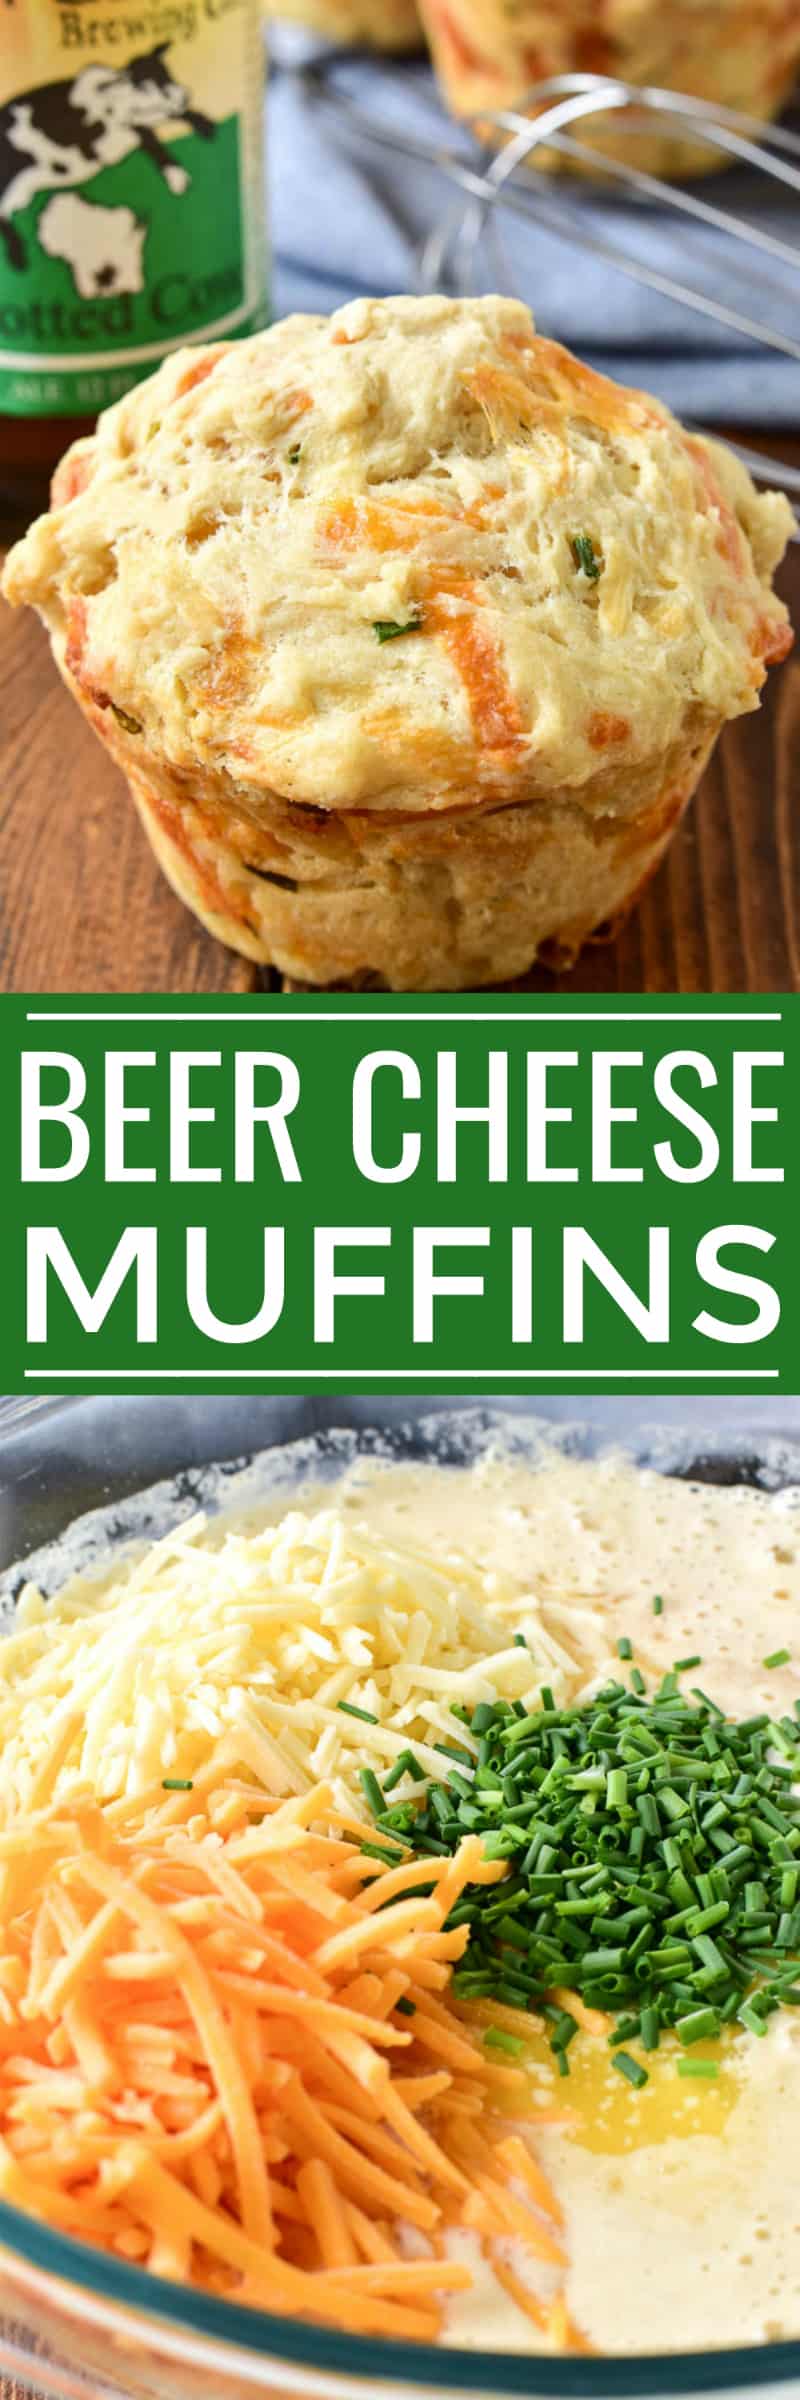 Take Beer Bread to the next level with these delicious Beer Cheese Muffins! Made with just eight simple ingredients, these muffins are incredibly easy to make and are the perfect addition to any meal. Enjoy them with a bowl of soup, a salad, or all on their own. If you love beer bread, you'll fall in love with these perfectly crusty, perfectly delicious Beer Cheese Muffins!